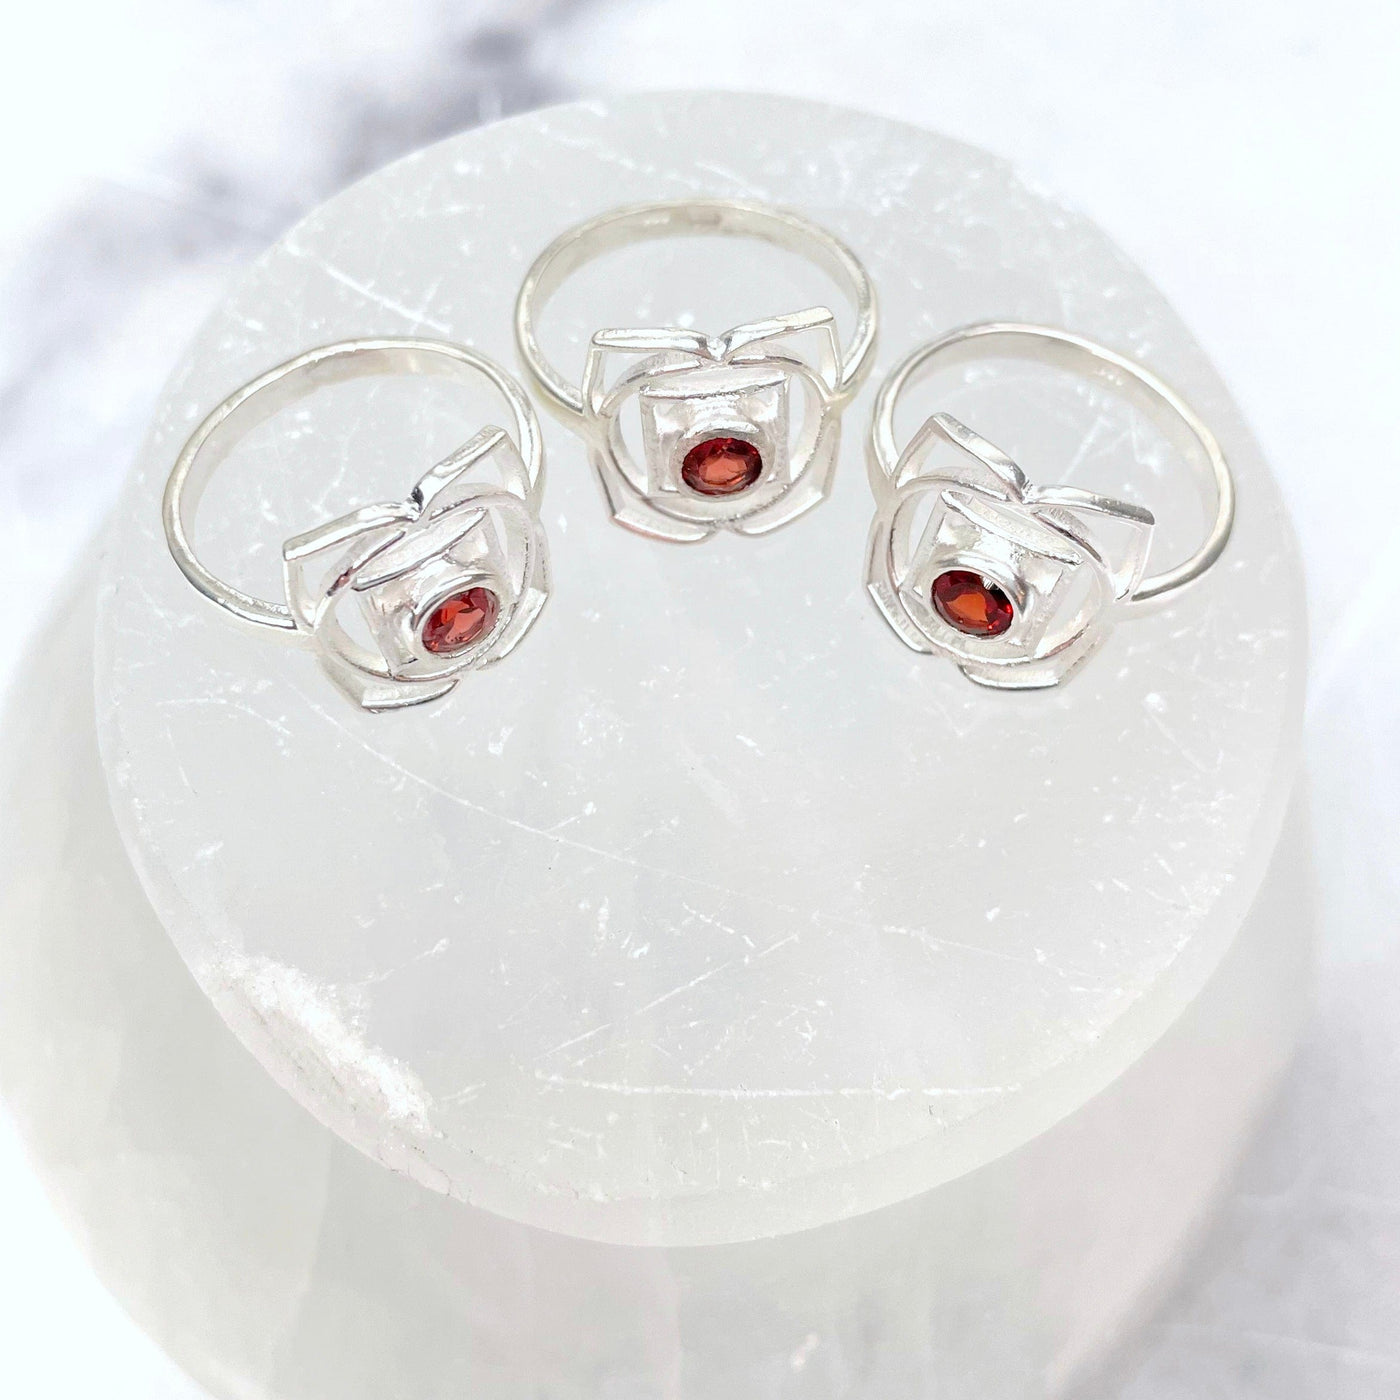 overhead view of silver root chakra rings